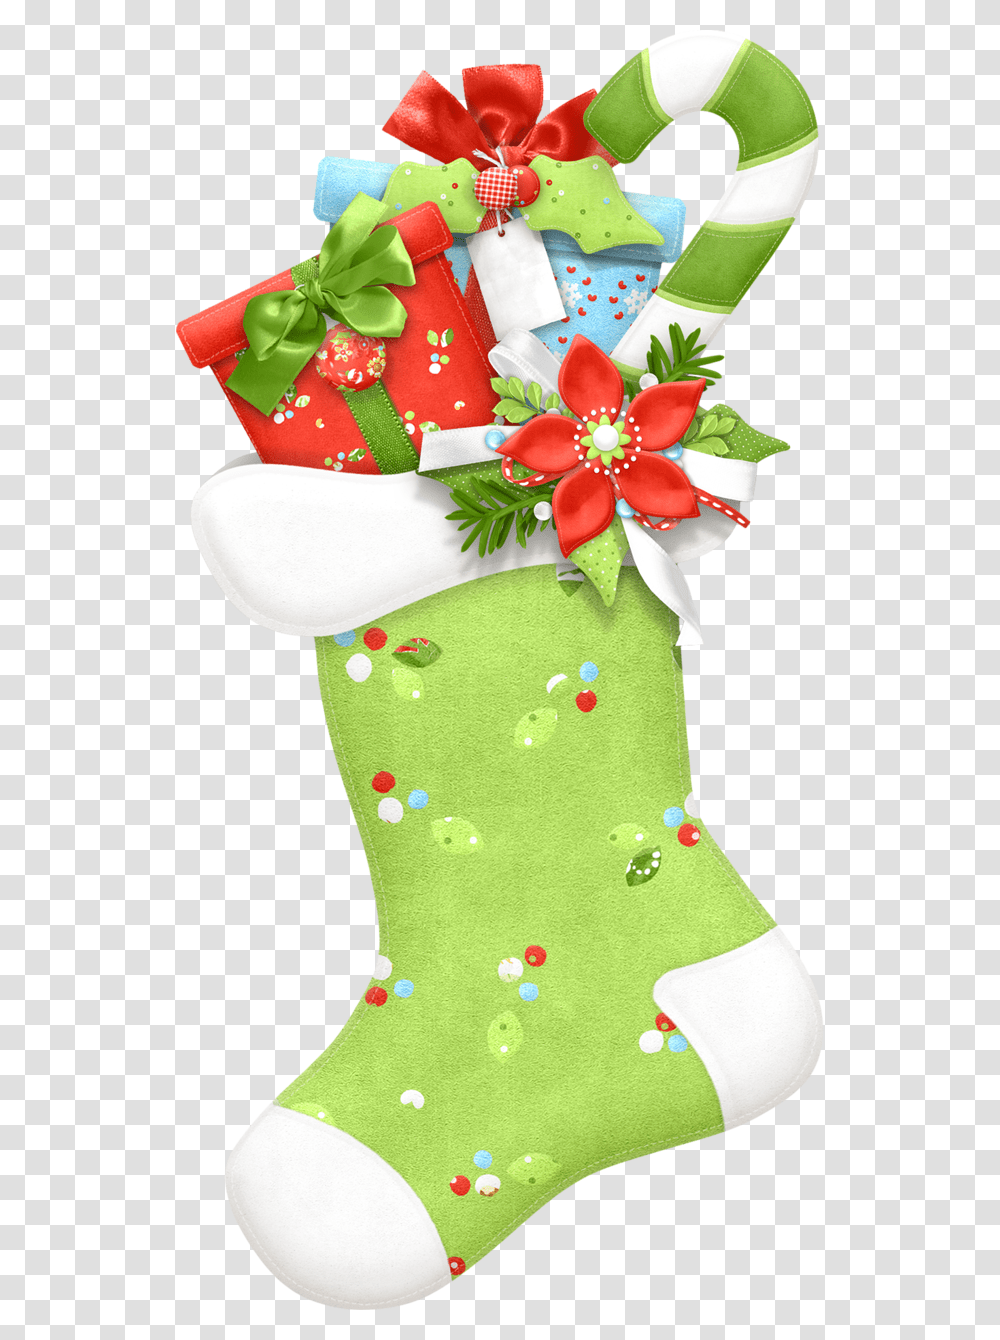 Hanging Christmas Stockings Clipart Background Christmas Stockings, Gift, Birthday Cake, Dessert, Food Transparent Png